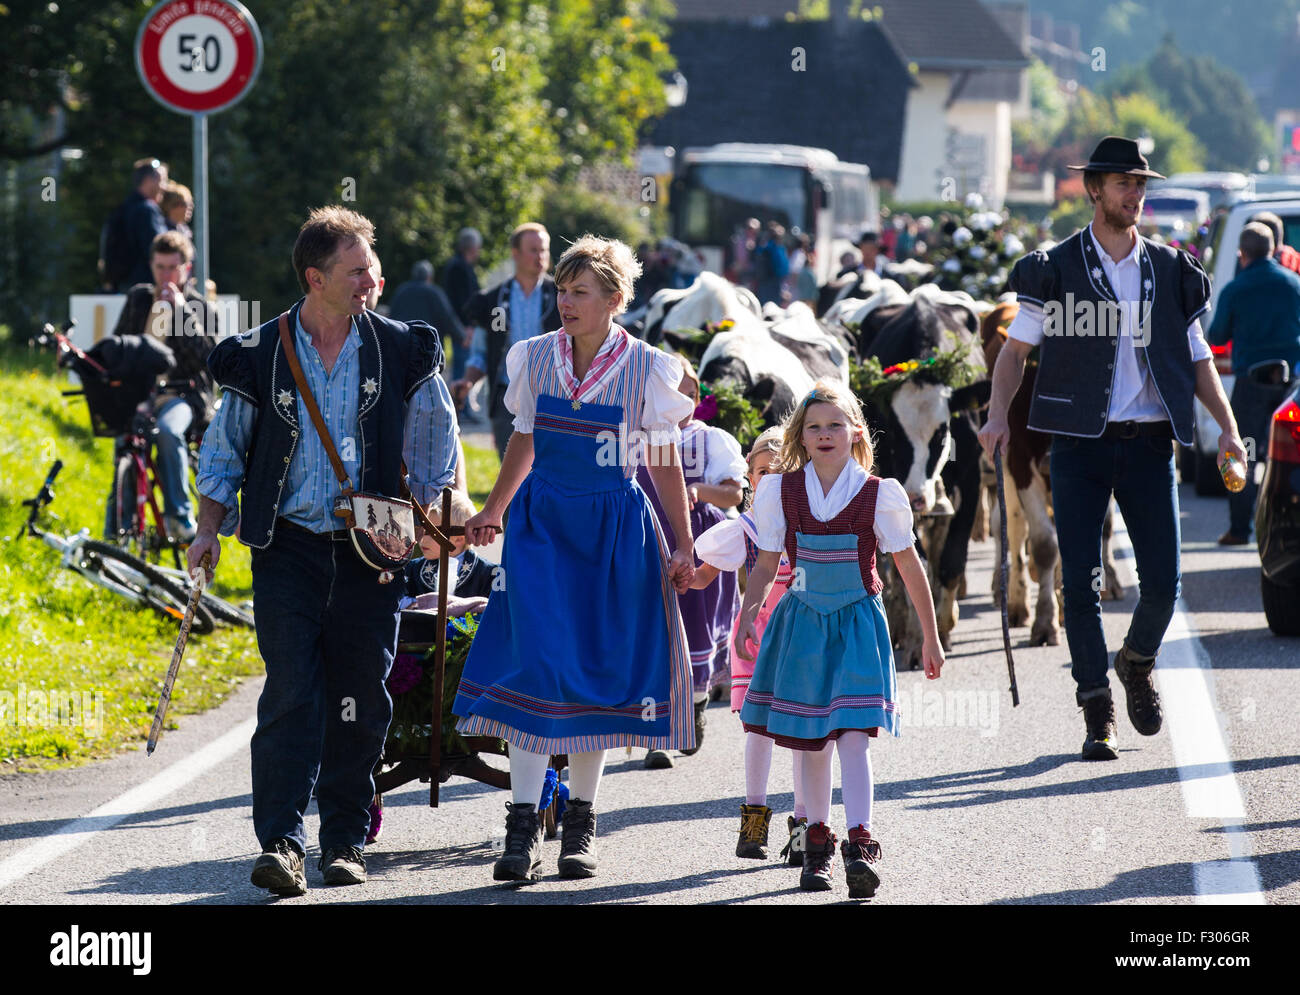 Geneva, Switzerland. 26th Sep, 2015. Local herdsmen in traditional dress drive their cows down the mountains during the Desalpe festival in Charmey, Switzerland, Sept. 26, 2015. The Desalpe is a traditional annual procession when cows make their way down to the plain at the beginning of the Autumn after more than four months of grazing on the Alpine pastures during the Summer. © Xu Jinquan/Xinhua/Alamy Live News Stock Photo